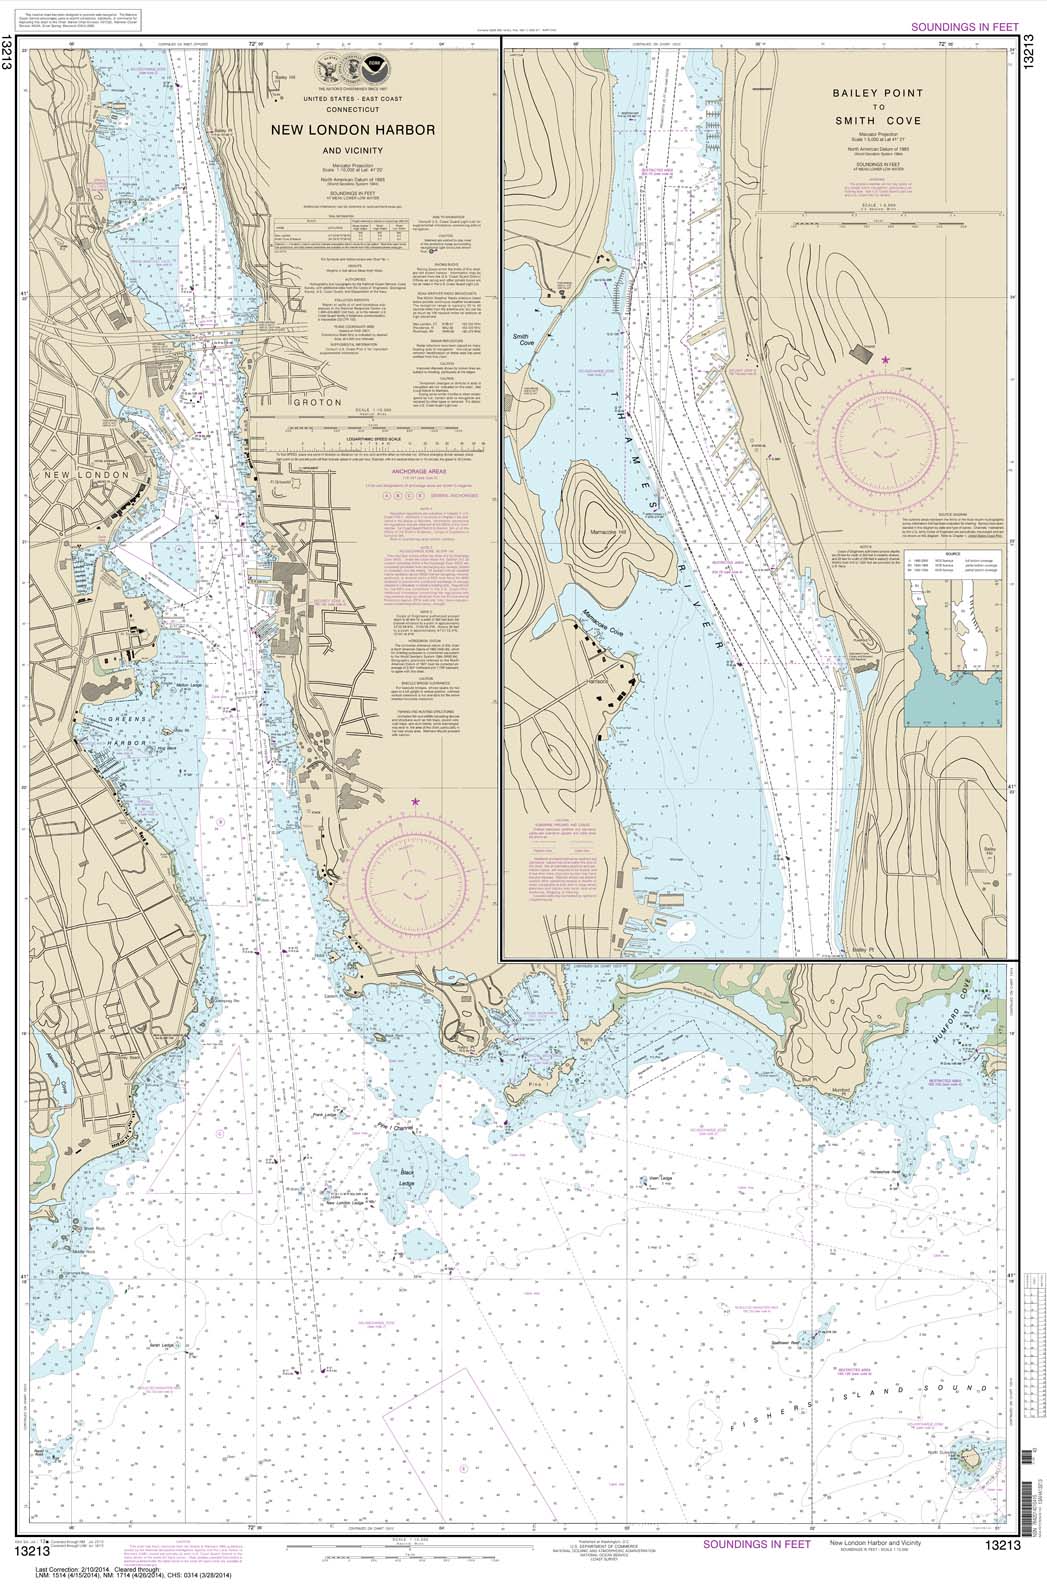 HISTORICAL NOAA Chart 13213: New London Harbor and vicinity;Bailey Point to Smith Cove